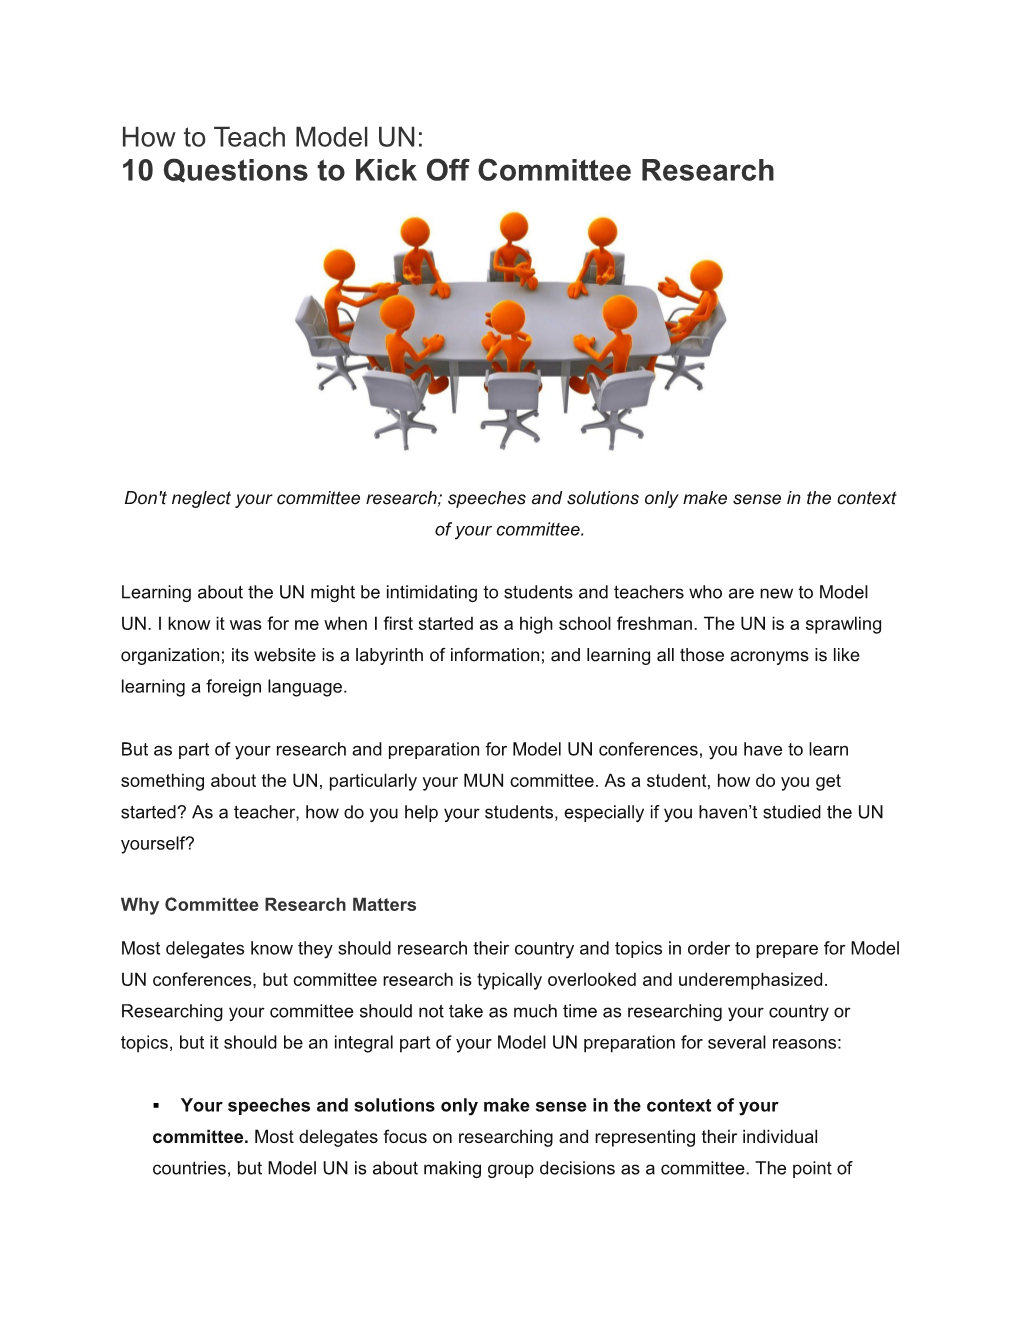 10 Questions to Kick Off Committee Research